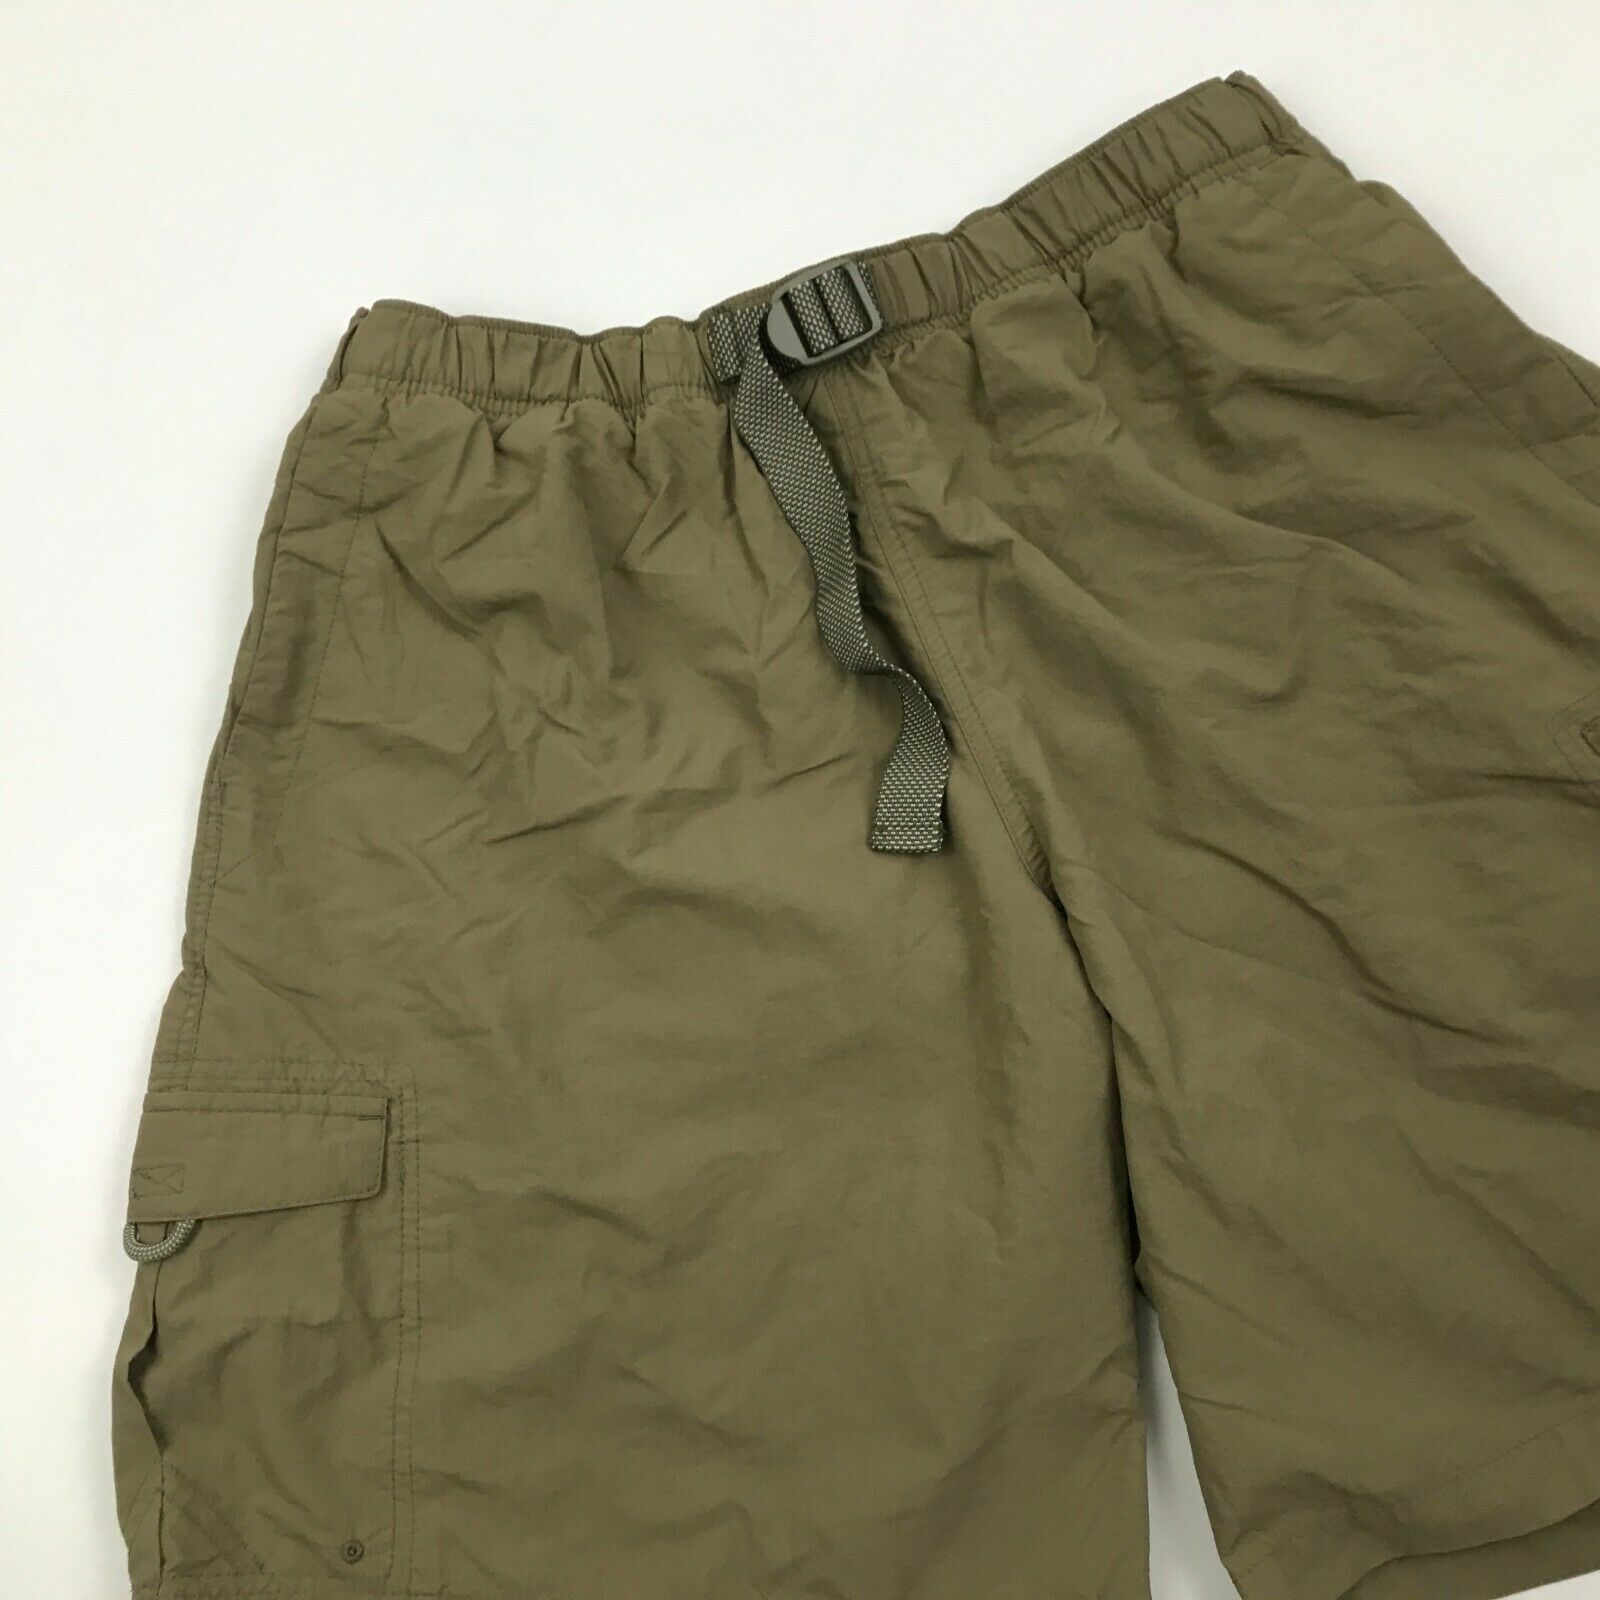 NEW Columbia Hybrid Cargo Shorts Size Large L Brown Belted Zip Pockets ...